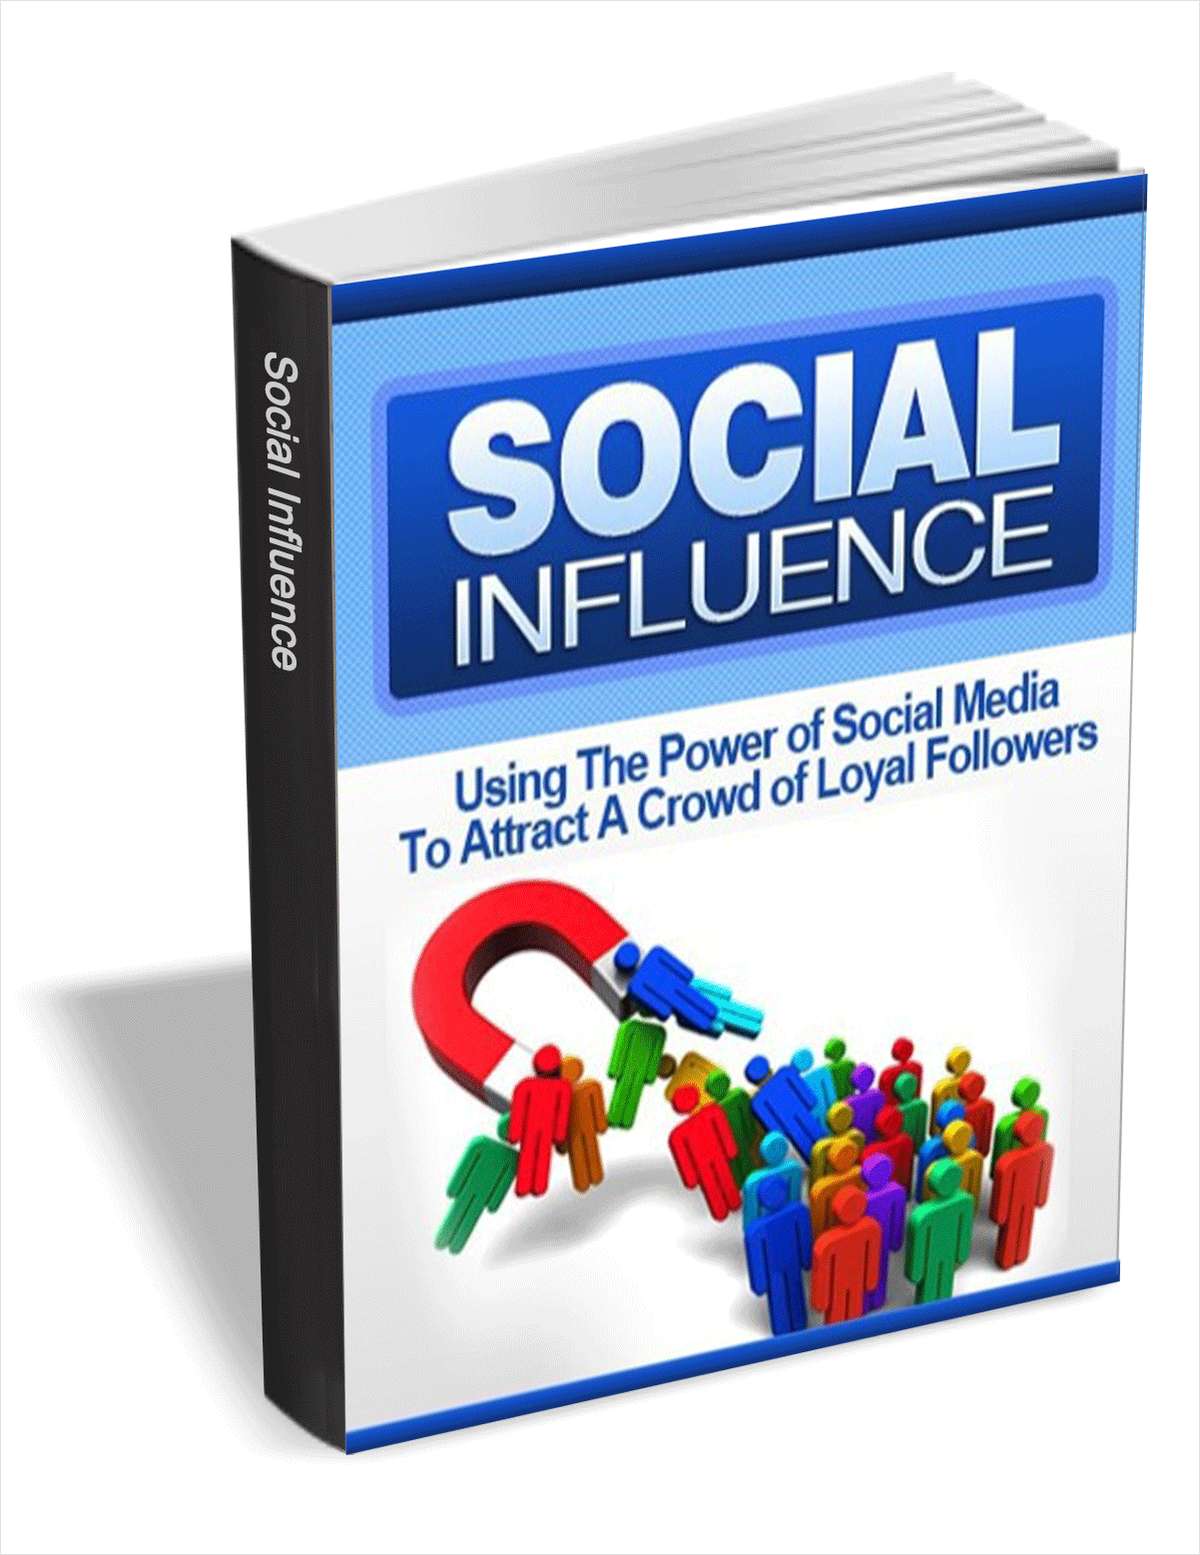 Social Influence - Using the Power of Social Media To Attract A Crowd of Loyal Followers